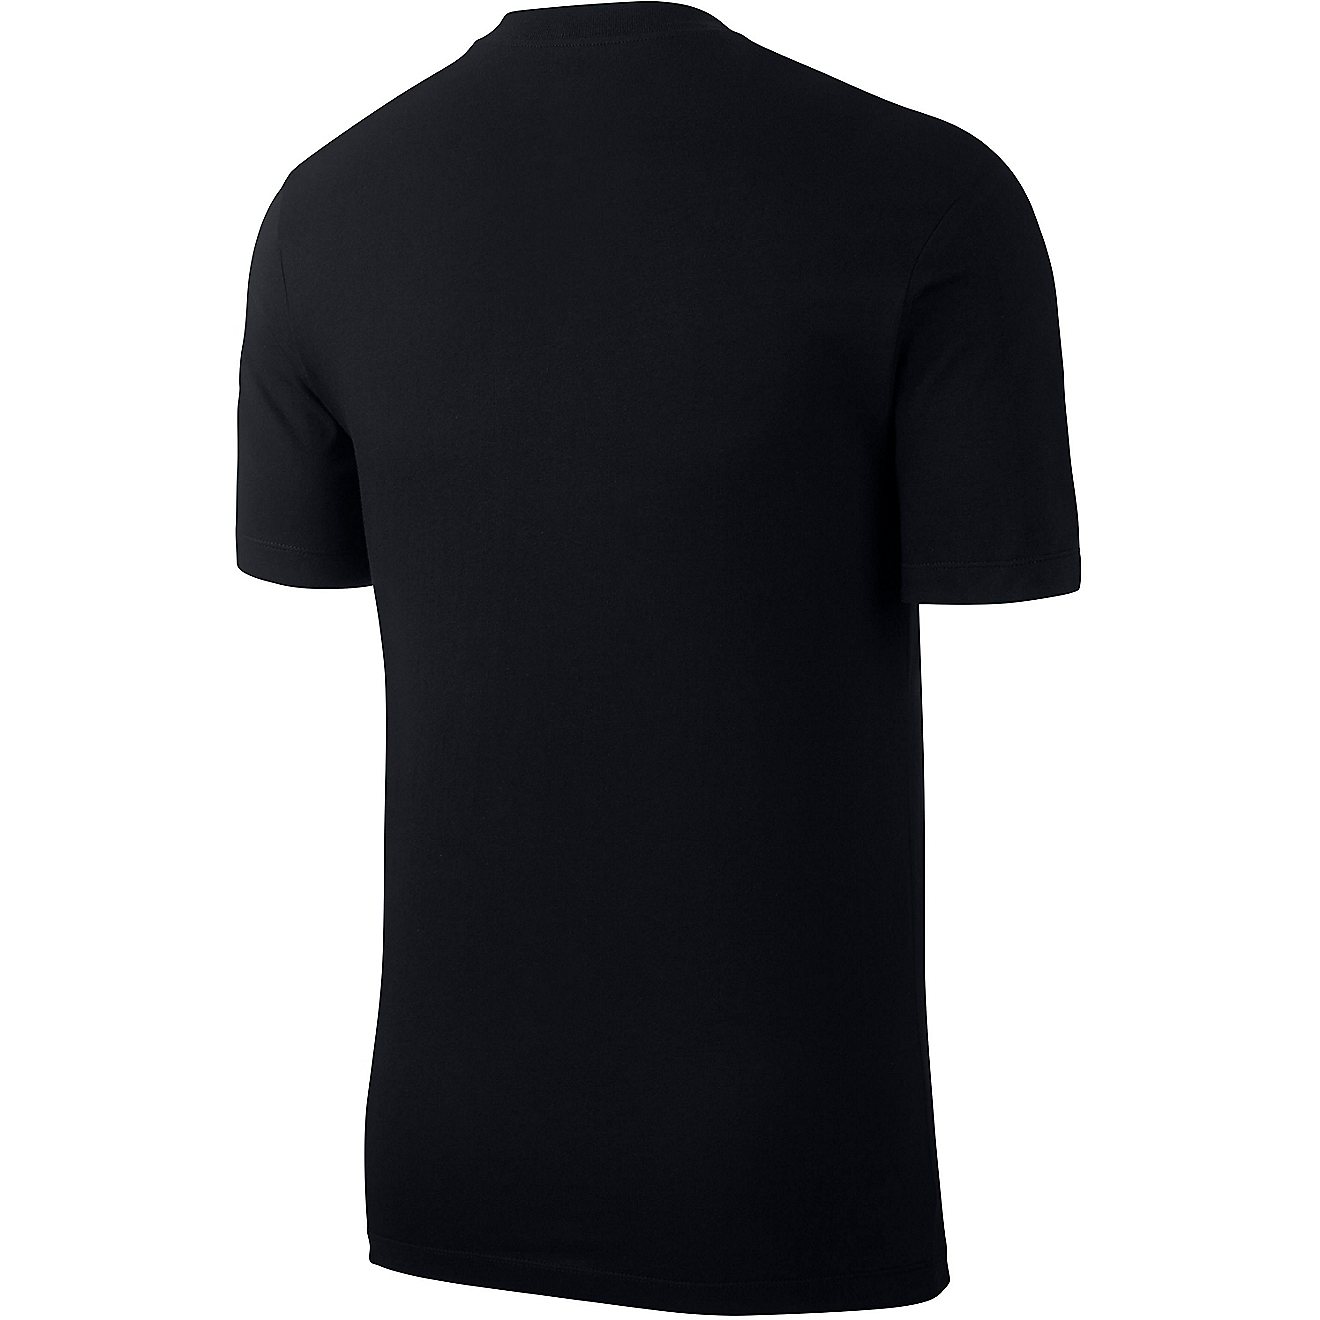 Nike Men's Just Do It T-shirt                                                                                                    - view number 5